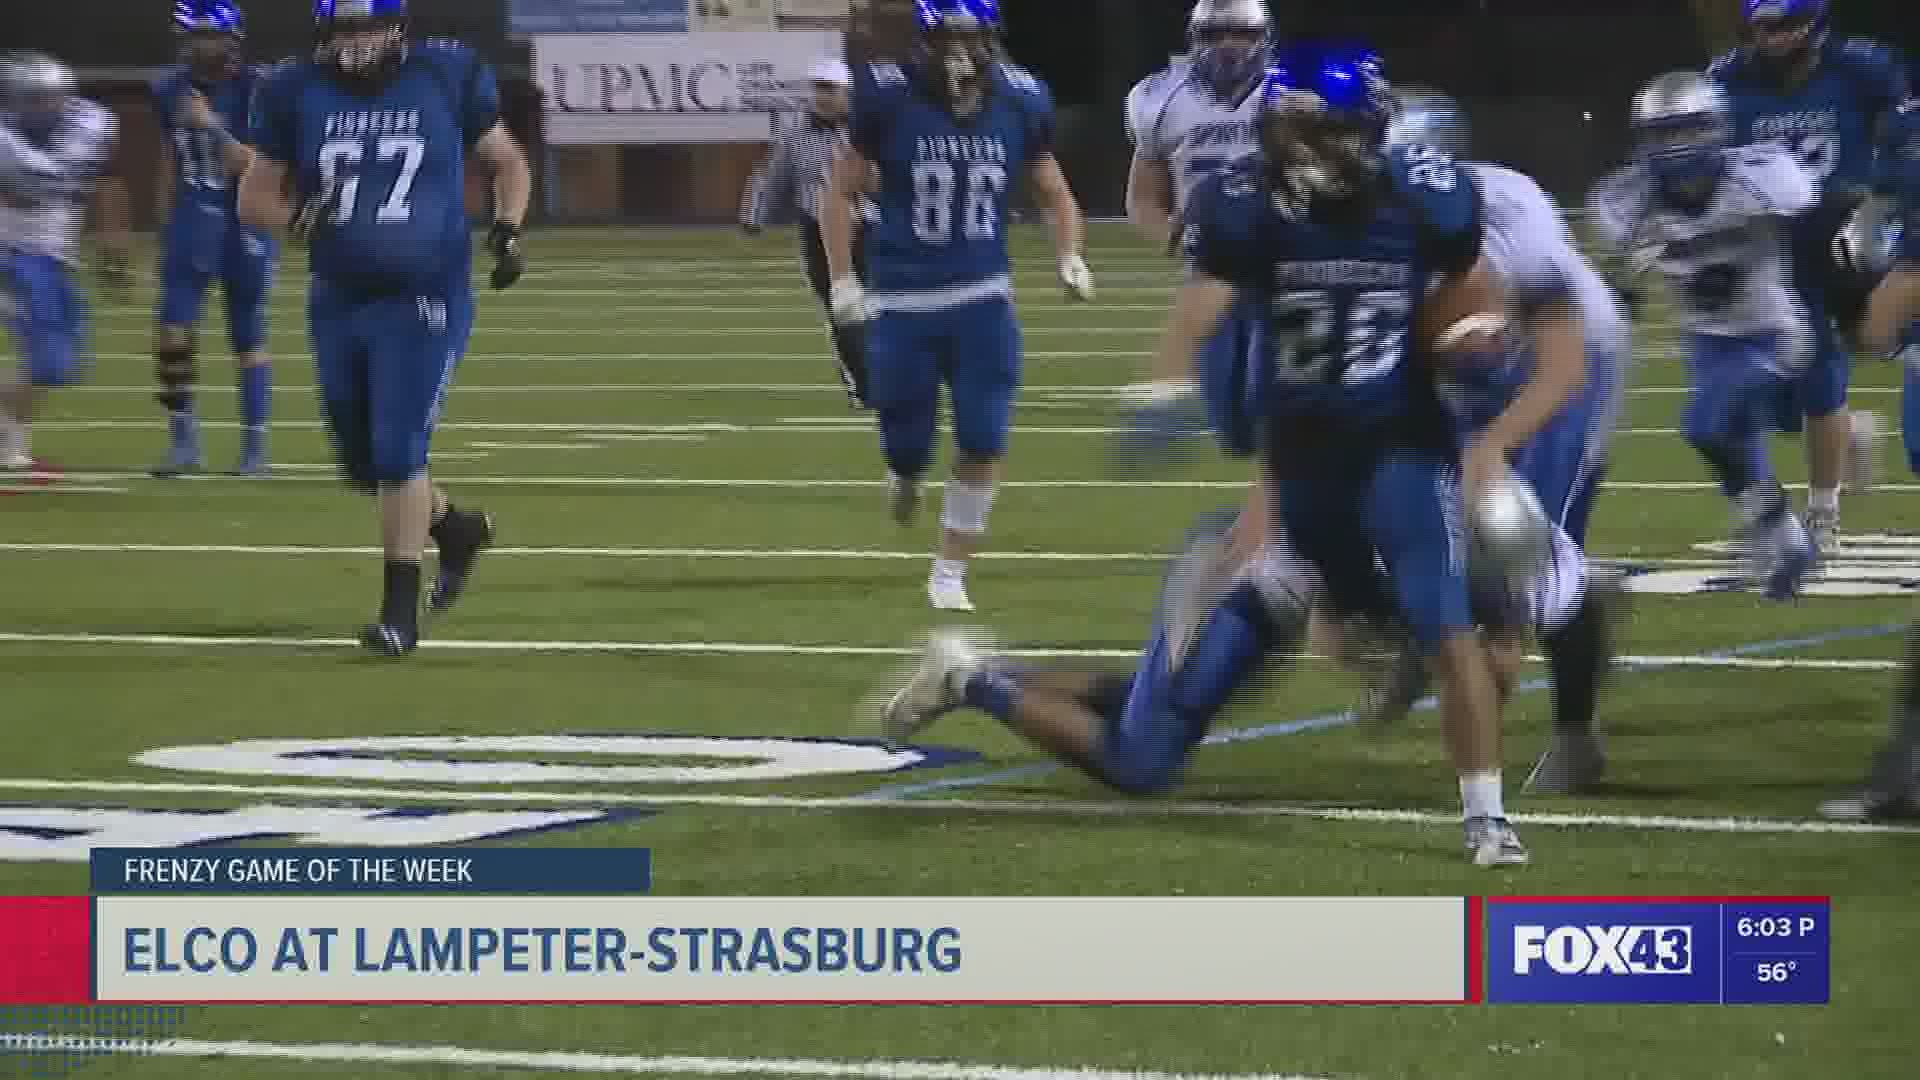 HSFF Game of the Week Preview: Elco at Lampeter-Strasburg